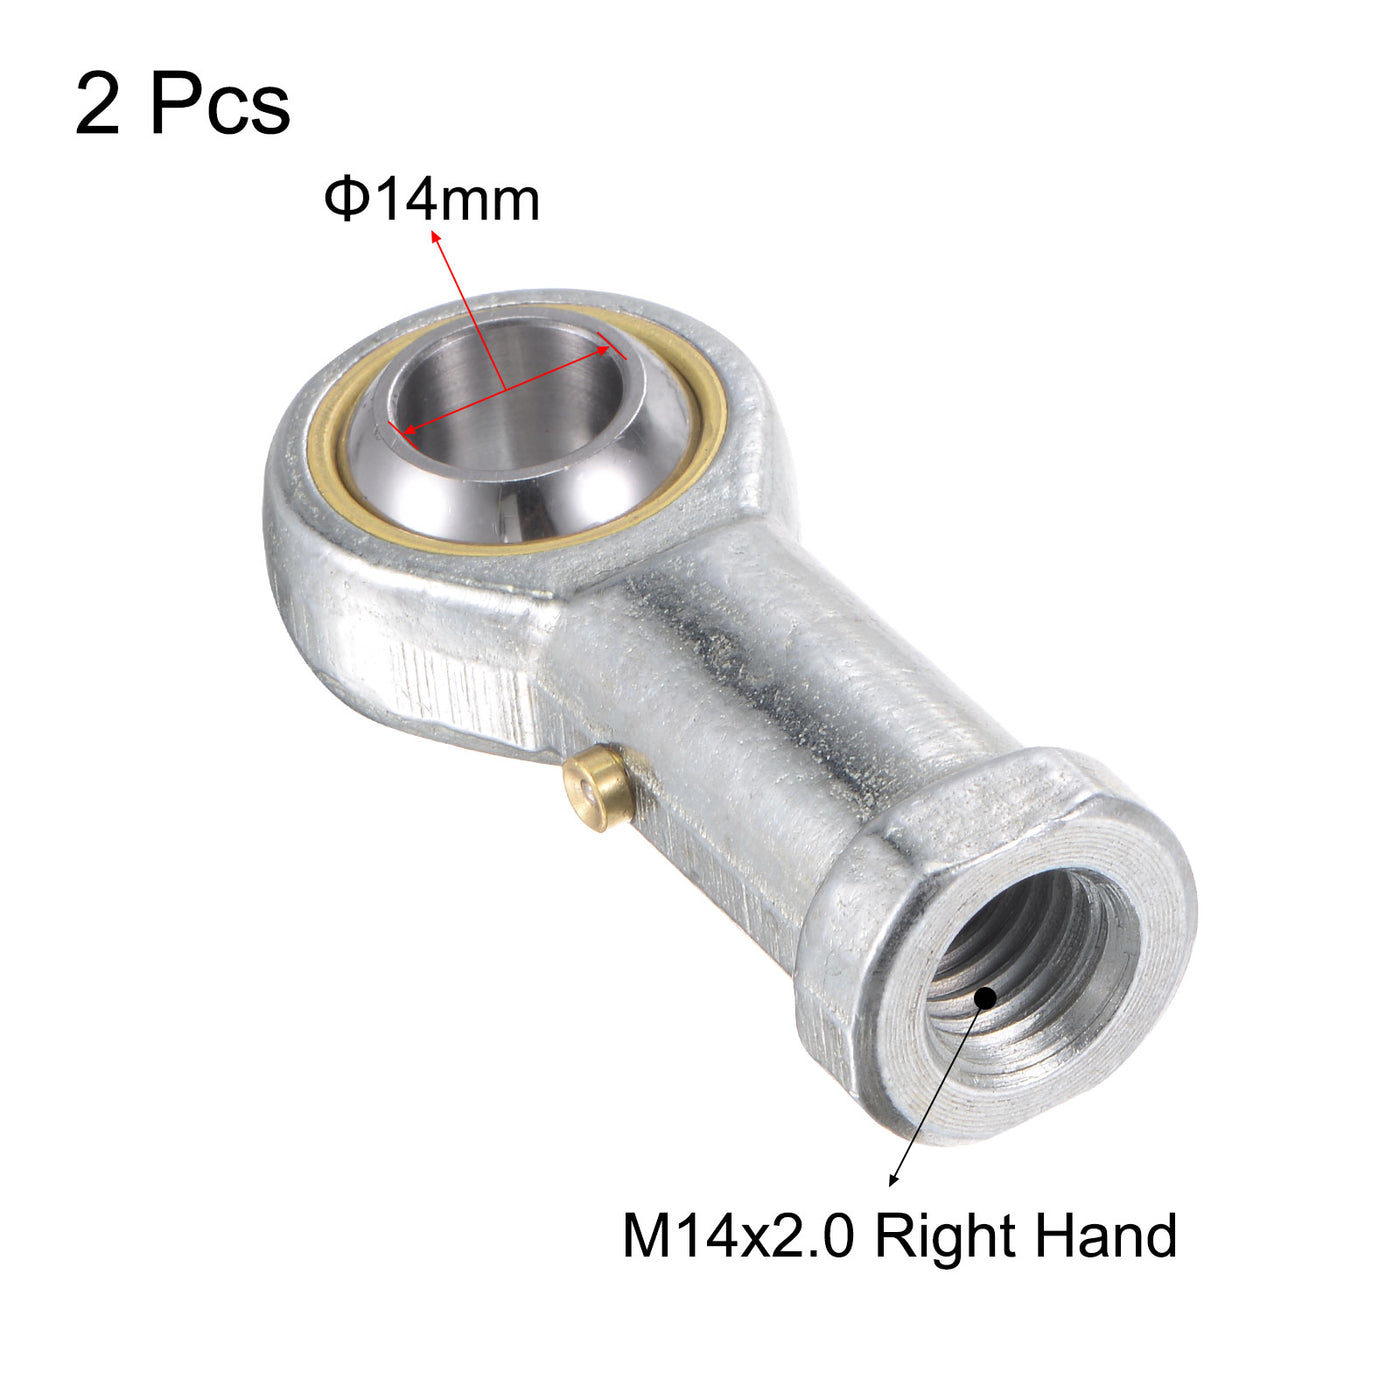 uxcell Uxcell 2pcs PHS14 Rod End Bearing 14mm Bore Self-lubricat M14 Right Hand Female Thread